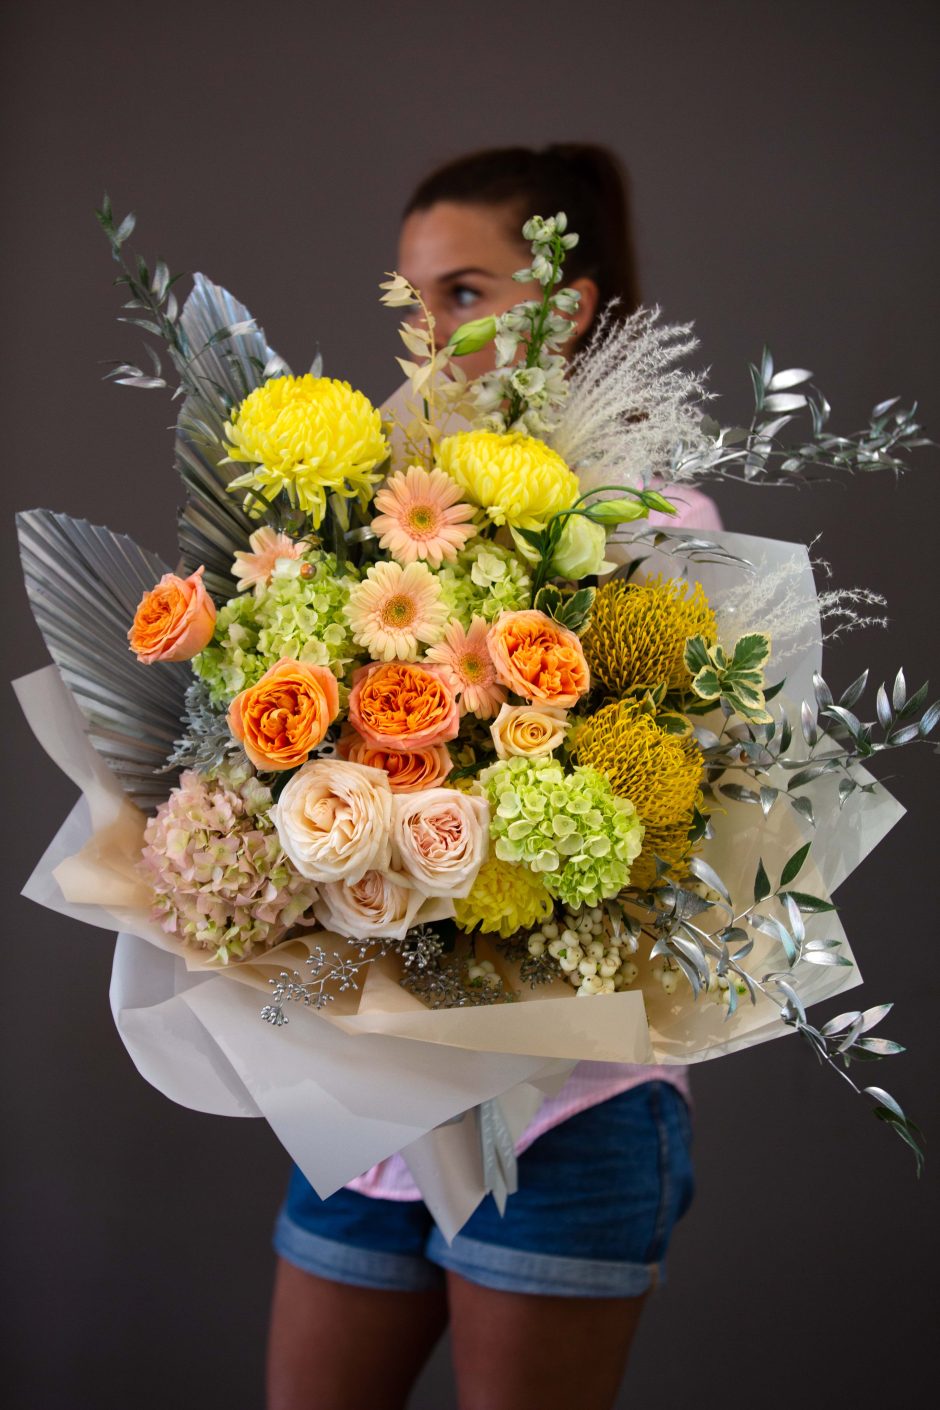 Yellow Roses Bouquet, Sunrise Meadow - Garden roses topped off with eye candy flowers - Maison la Fleur